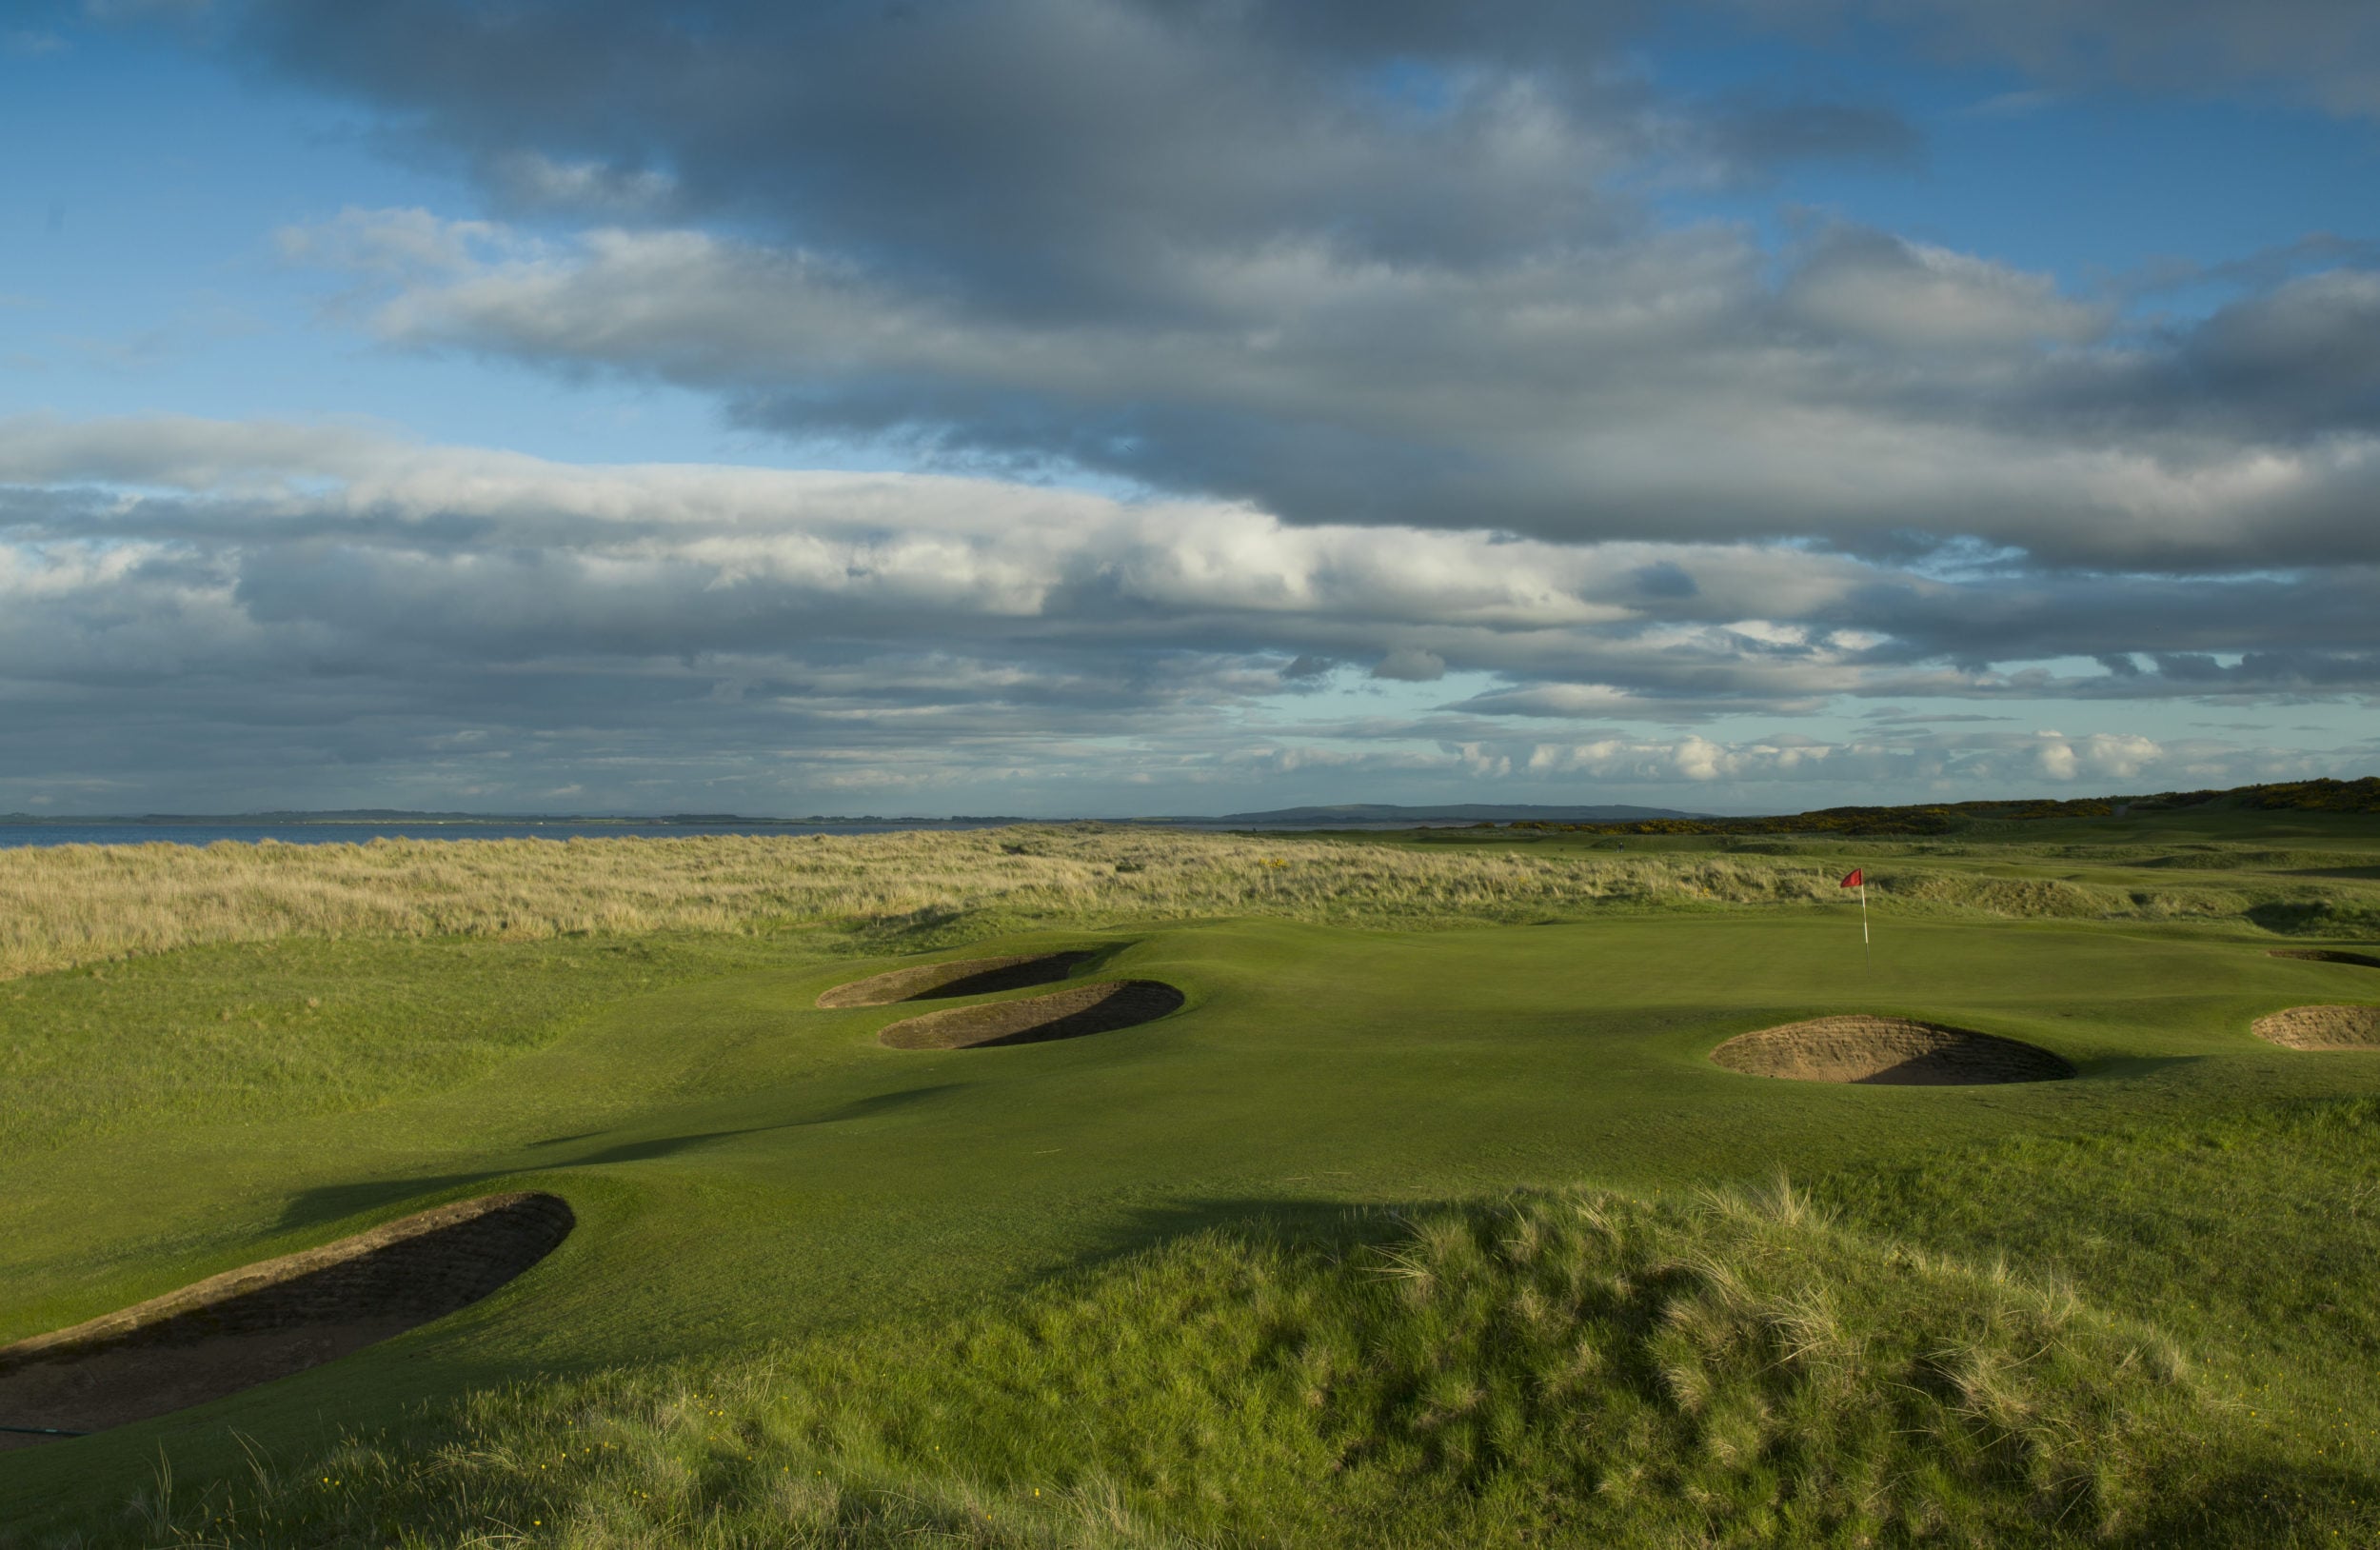 Image depicting the par-3 13th hole with many pot bunkers at Royal Dornoch Golf Club, Scotland